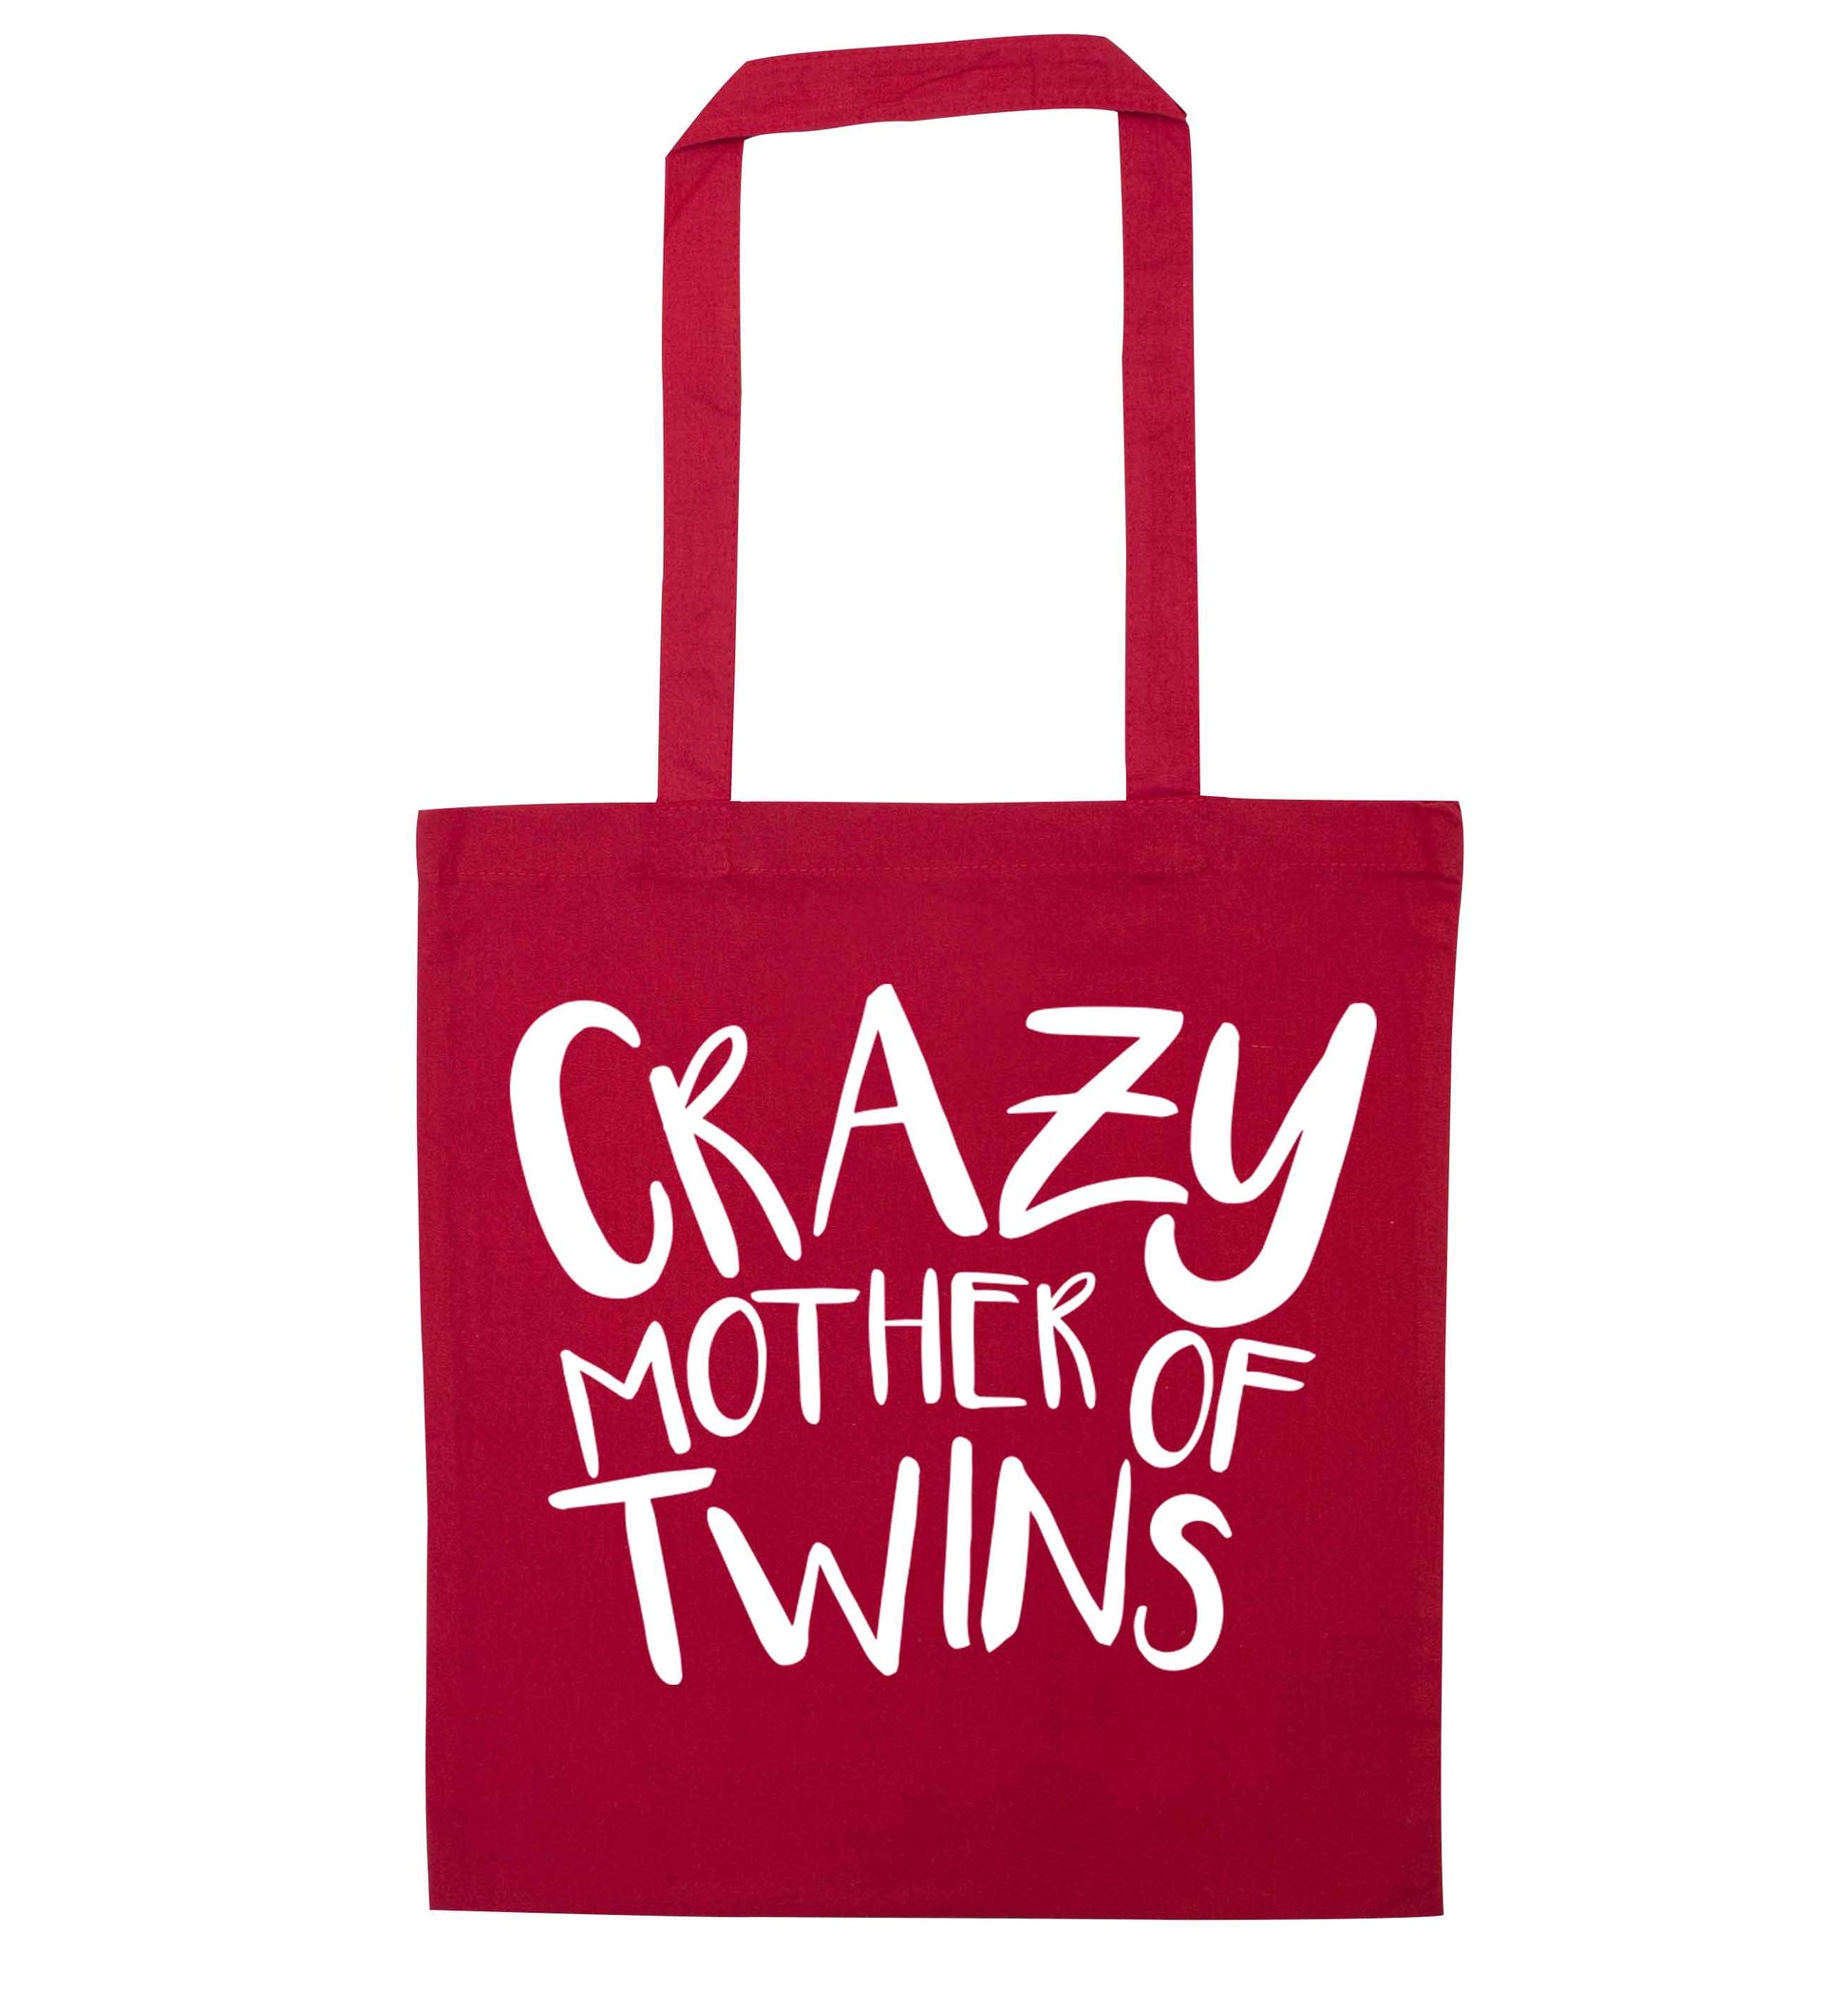 Crazy mother of twins red tote bag